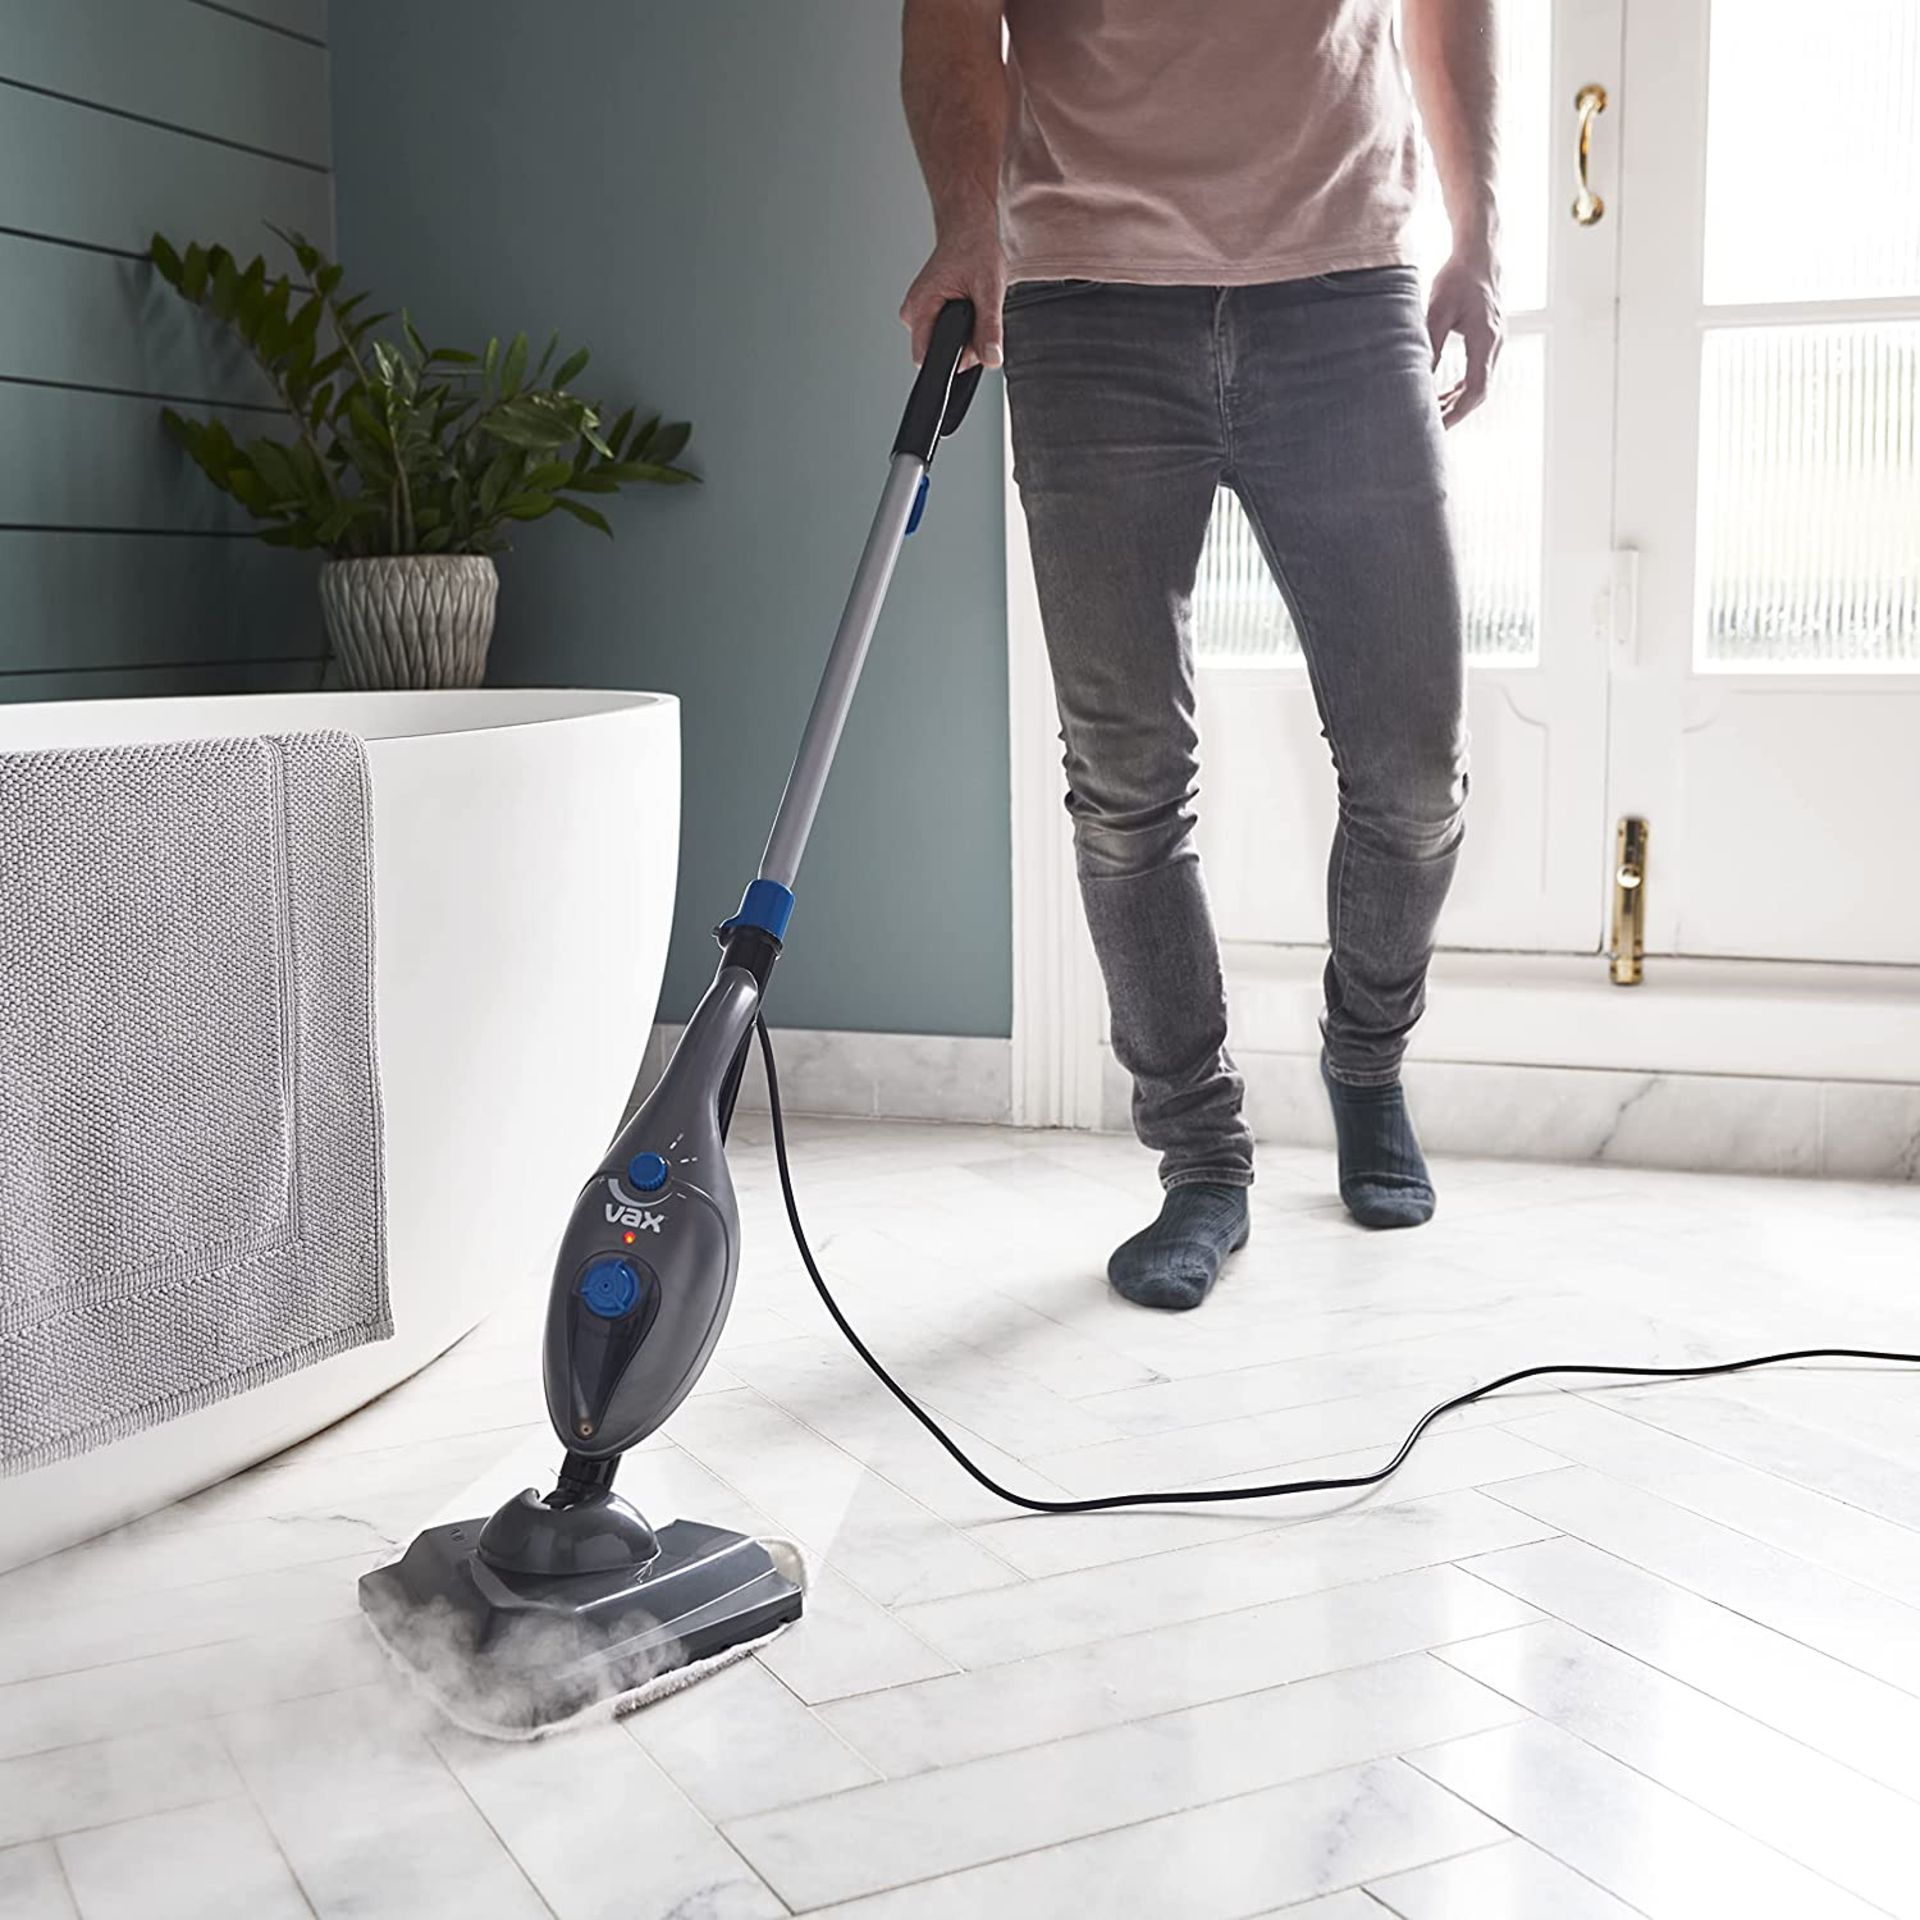 Vax Steam Glide Plus Multifunction Steam Mop | Converts to Handheld | CDHF-SGXA, 1300W FREE DELIVERY - Image 3 of 4